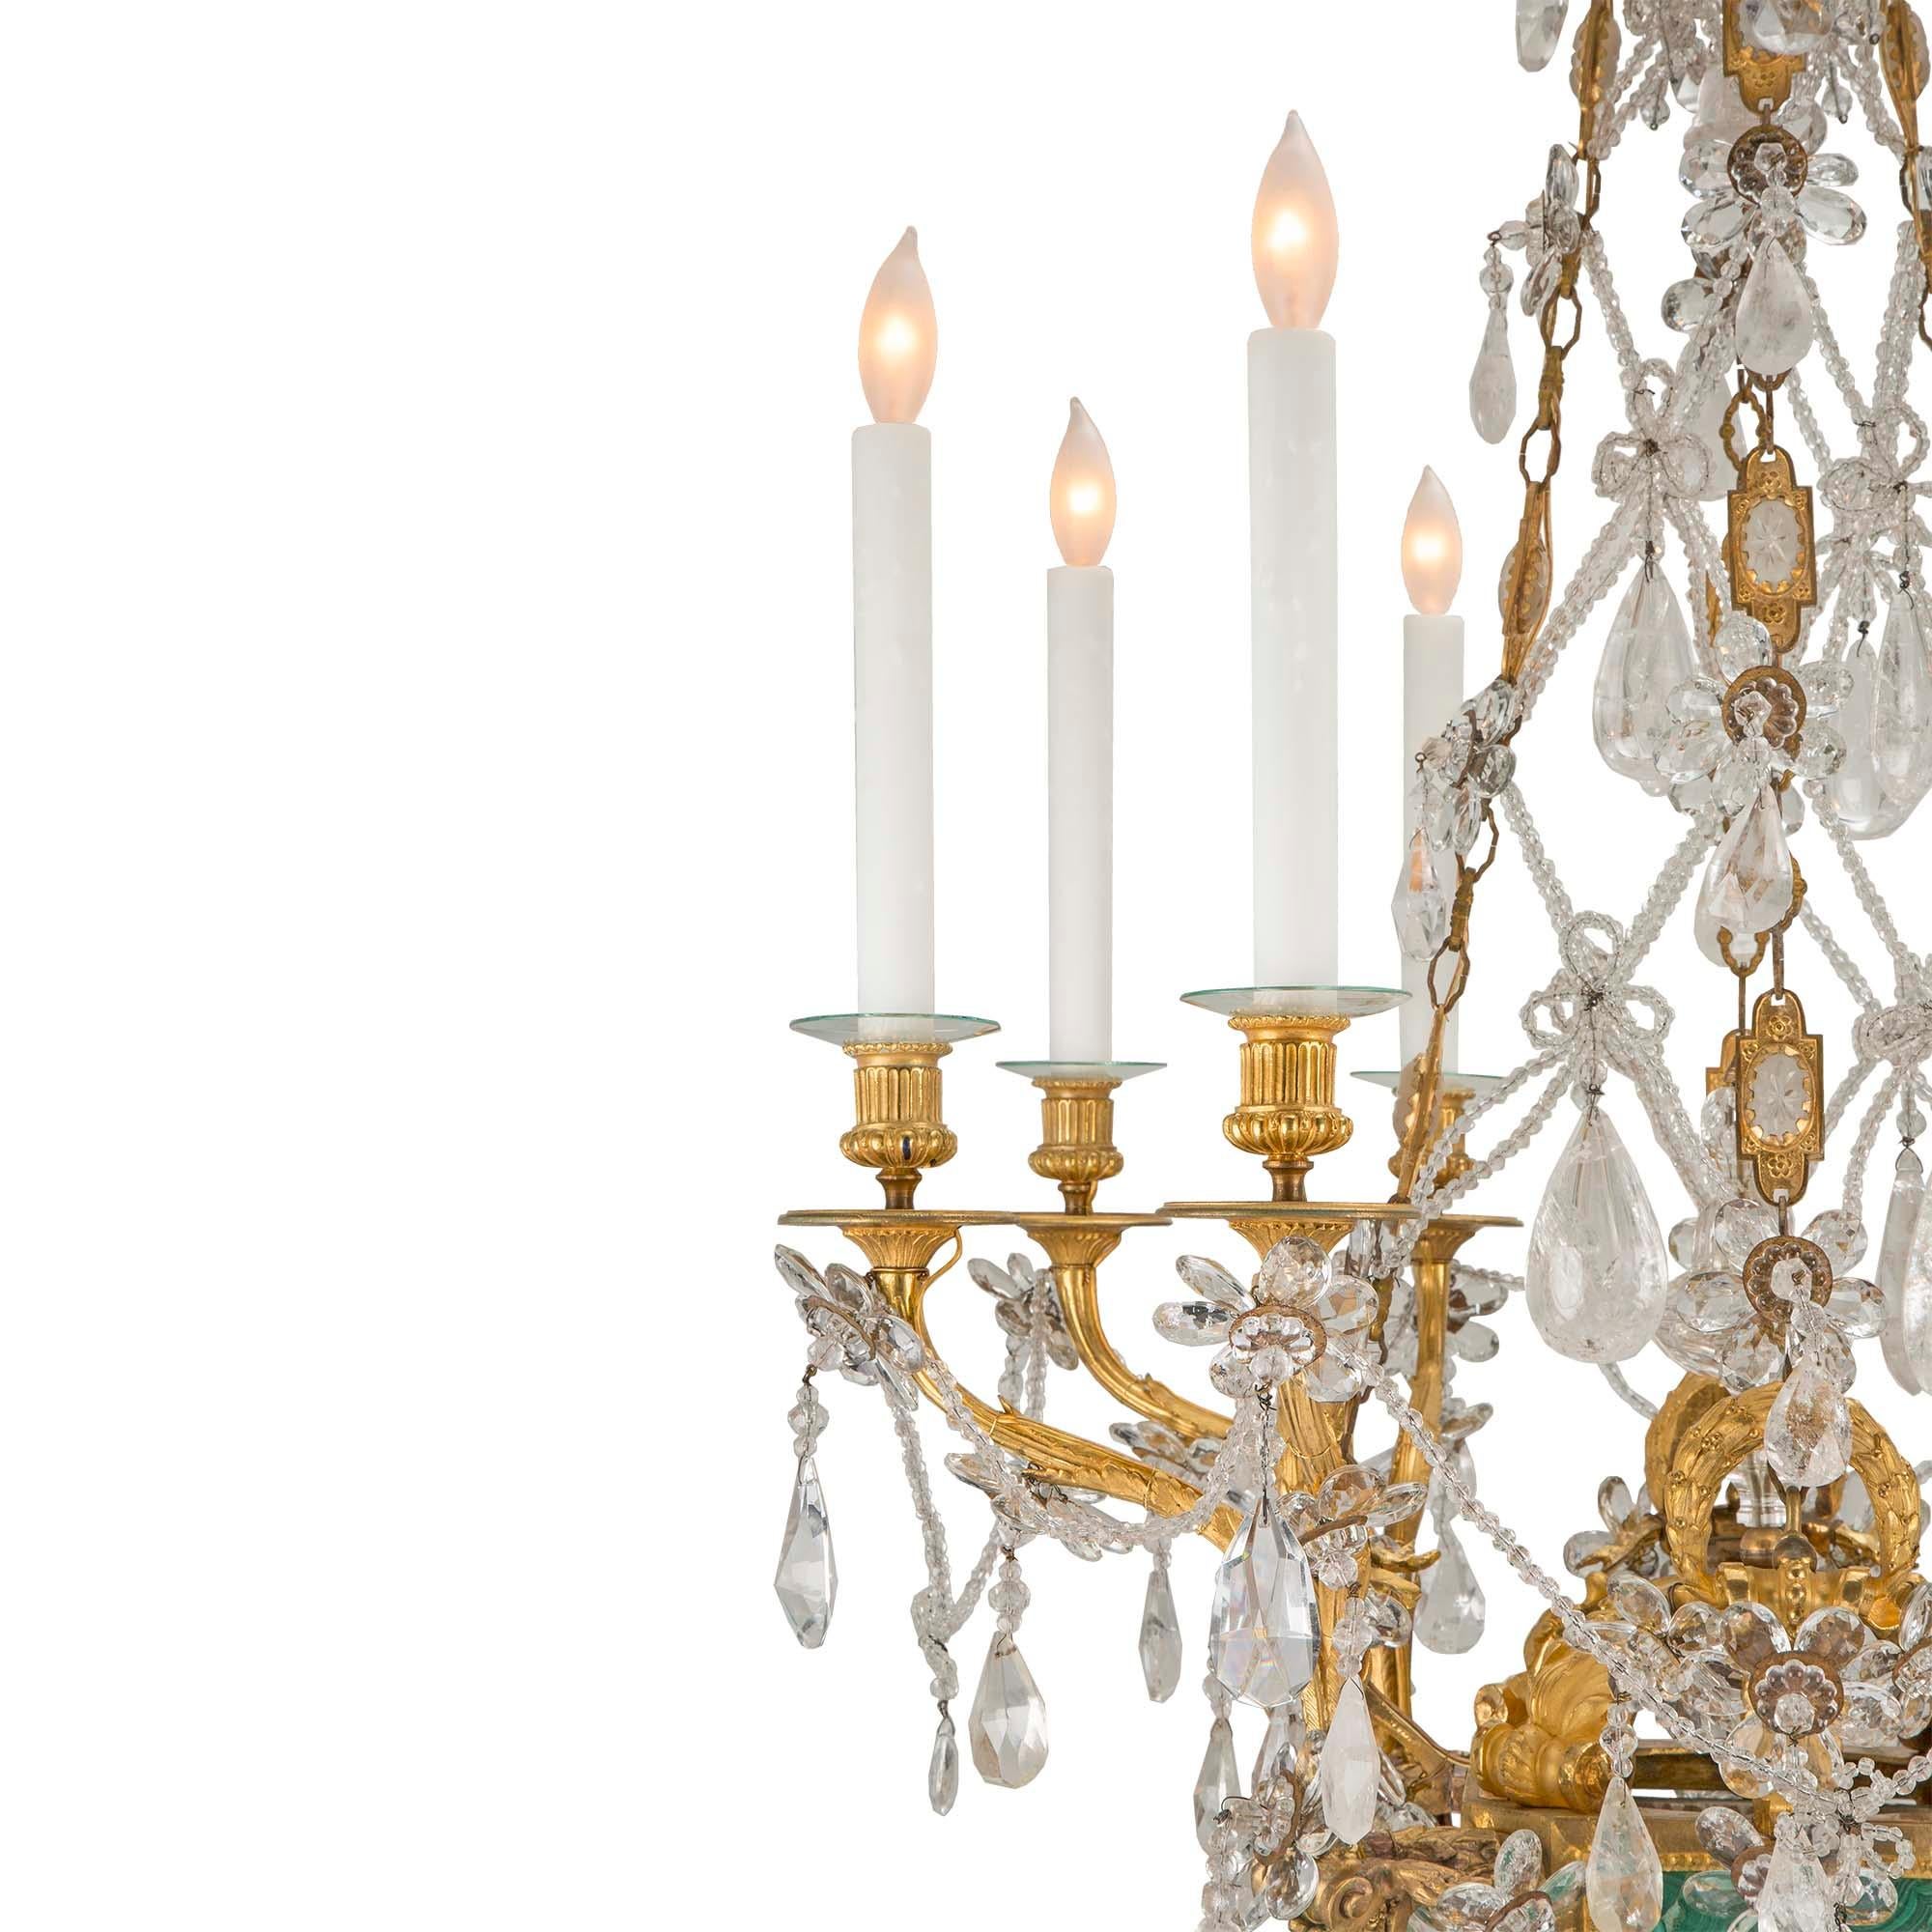 A stunning French early 19th century Louis XVI st. ormolu, rock crystal malachite eight arm chandelier. The chandelier is centered by a striking tear drop shaped rock crystal pendant below a richly chased ormolu acorn finial and fluted bottom base,